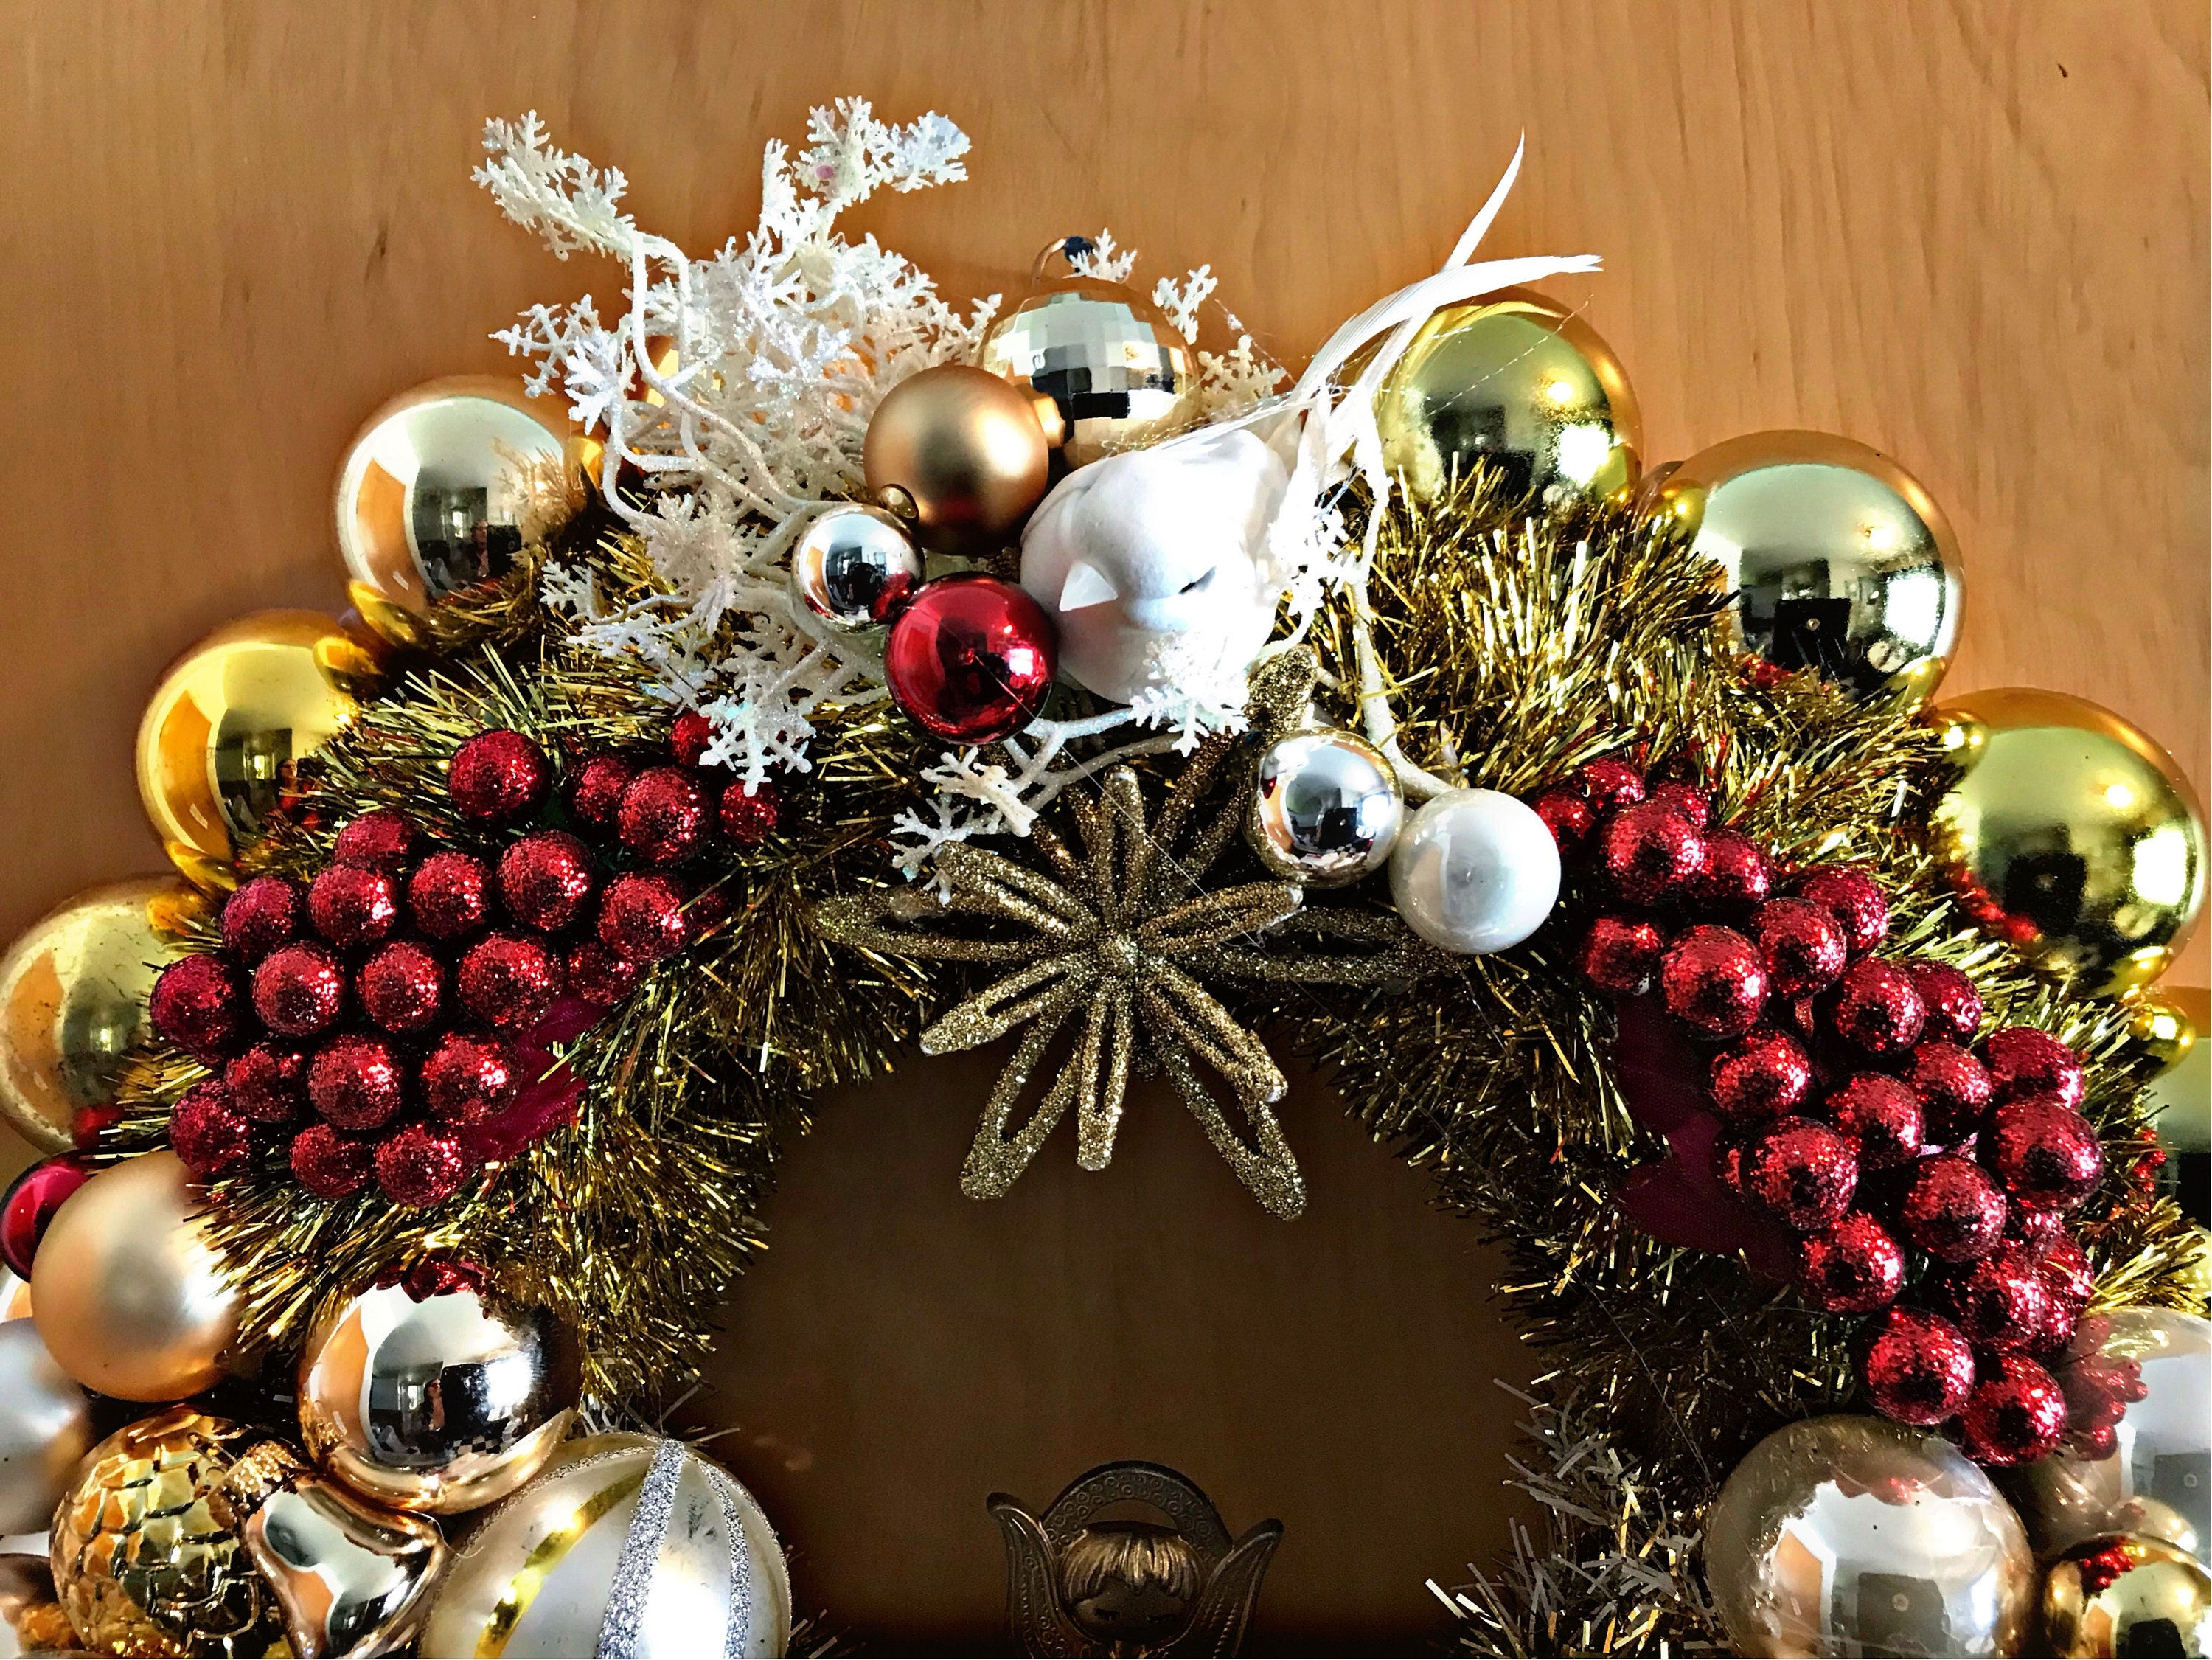 Make One 6 Inch Mini Quillie Wreath Kit! Makes a Great Holiday Ornament or  Wall Hanging for Your Seasonal Decor! — loop by loop studio